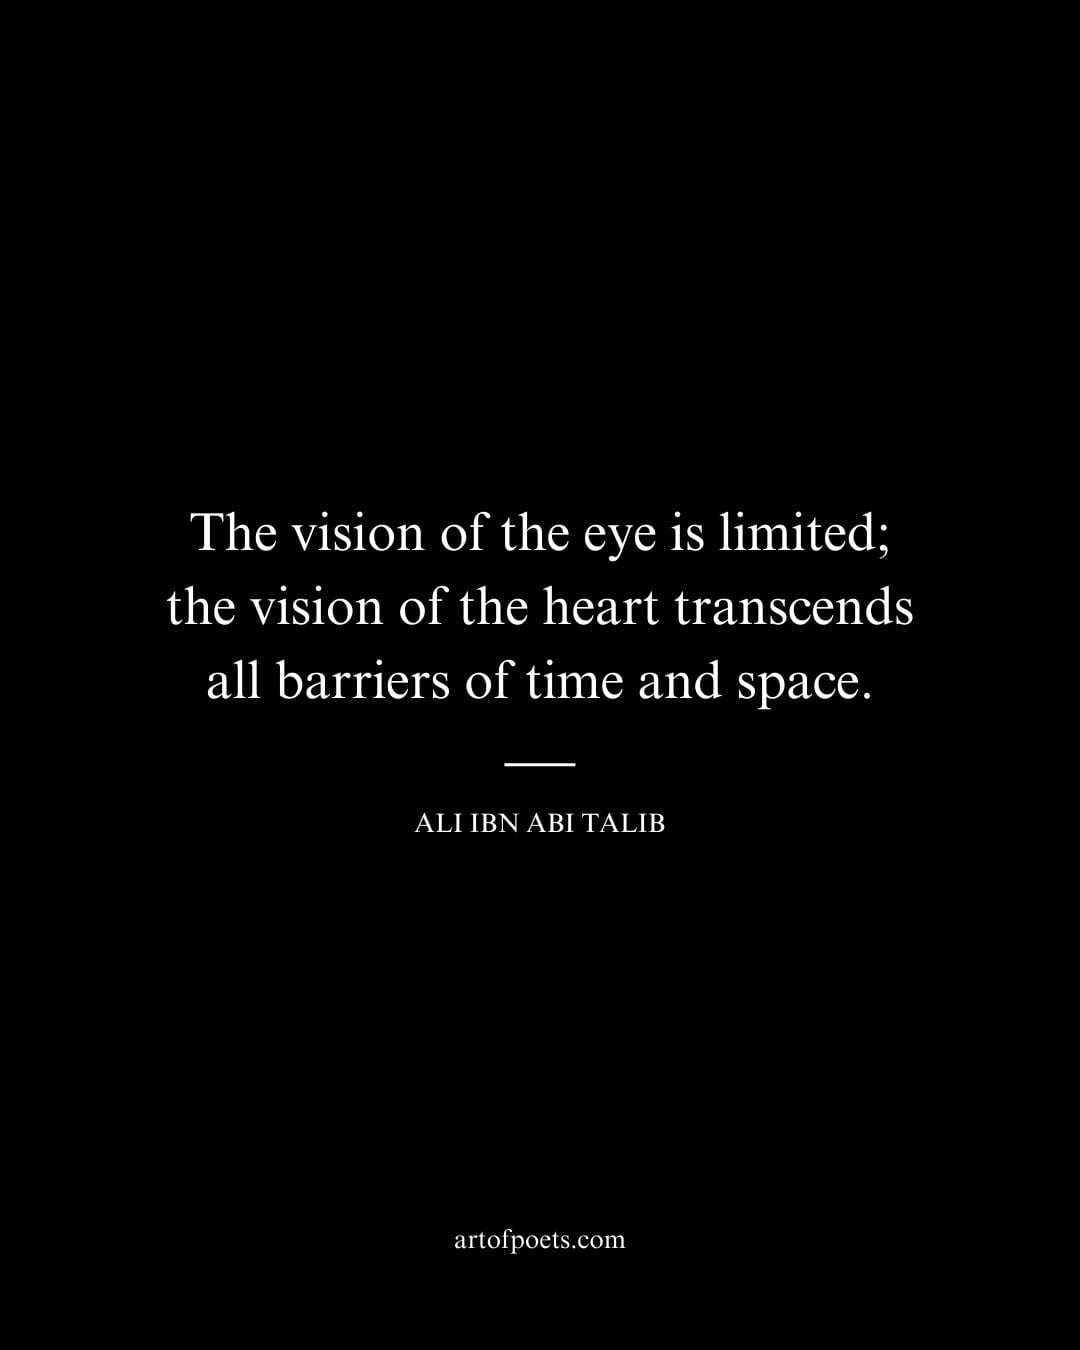 The vision of the eye is limited the vision of the heart transcends all barriers of time and space